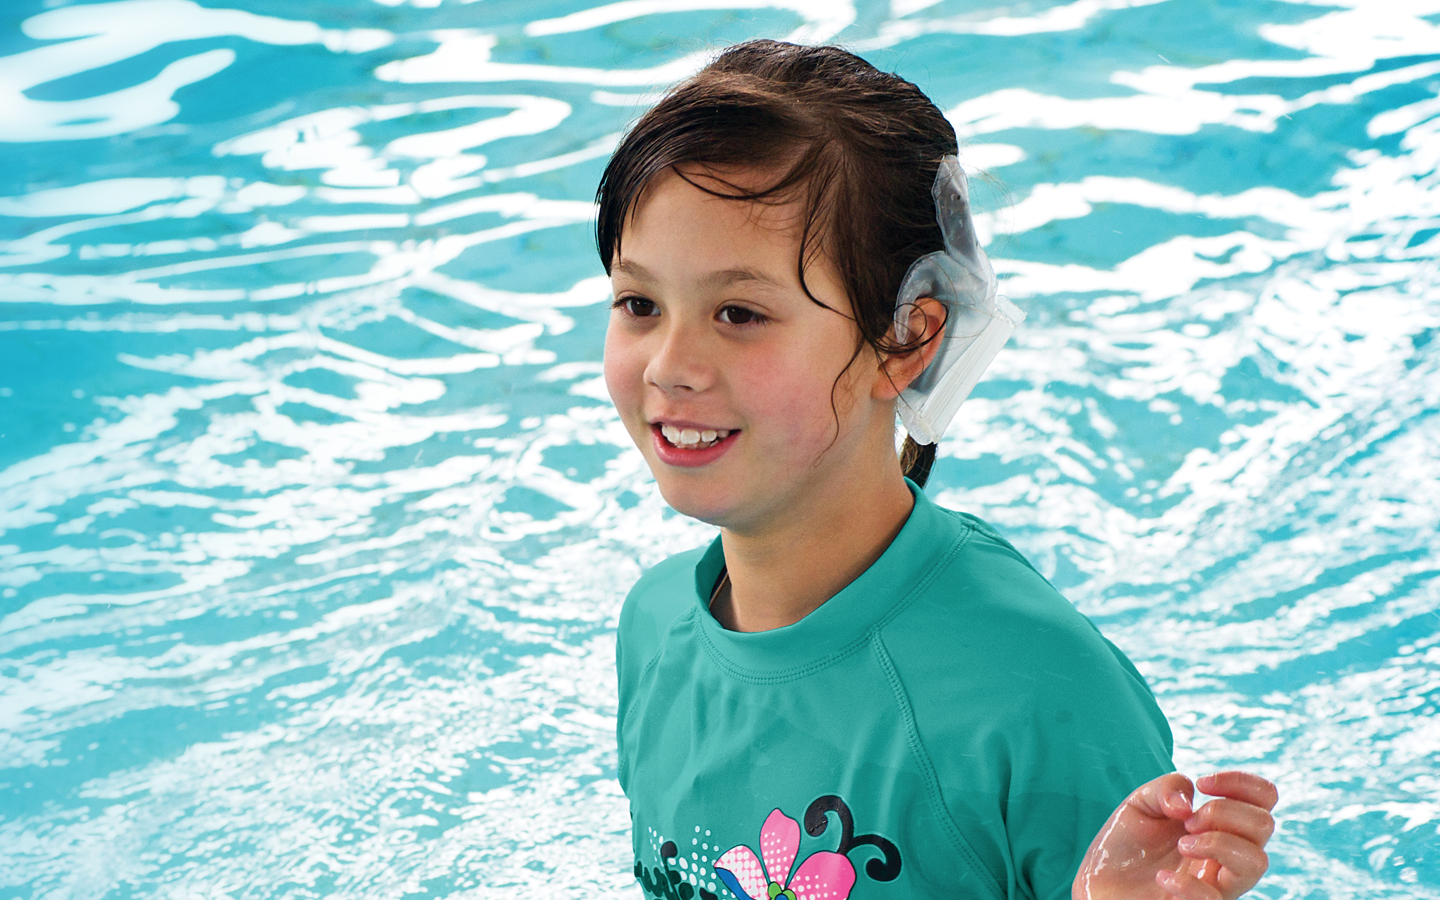 A girl wears her Nucleus water-safe accessory as she plays in the pool